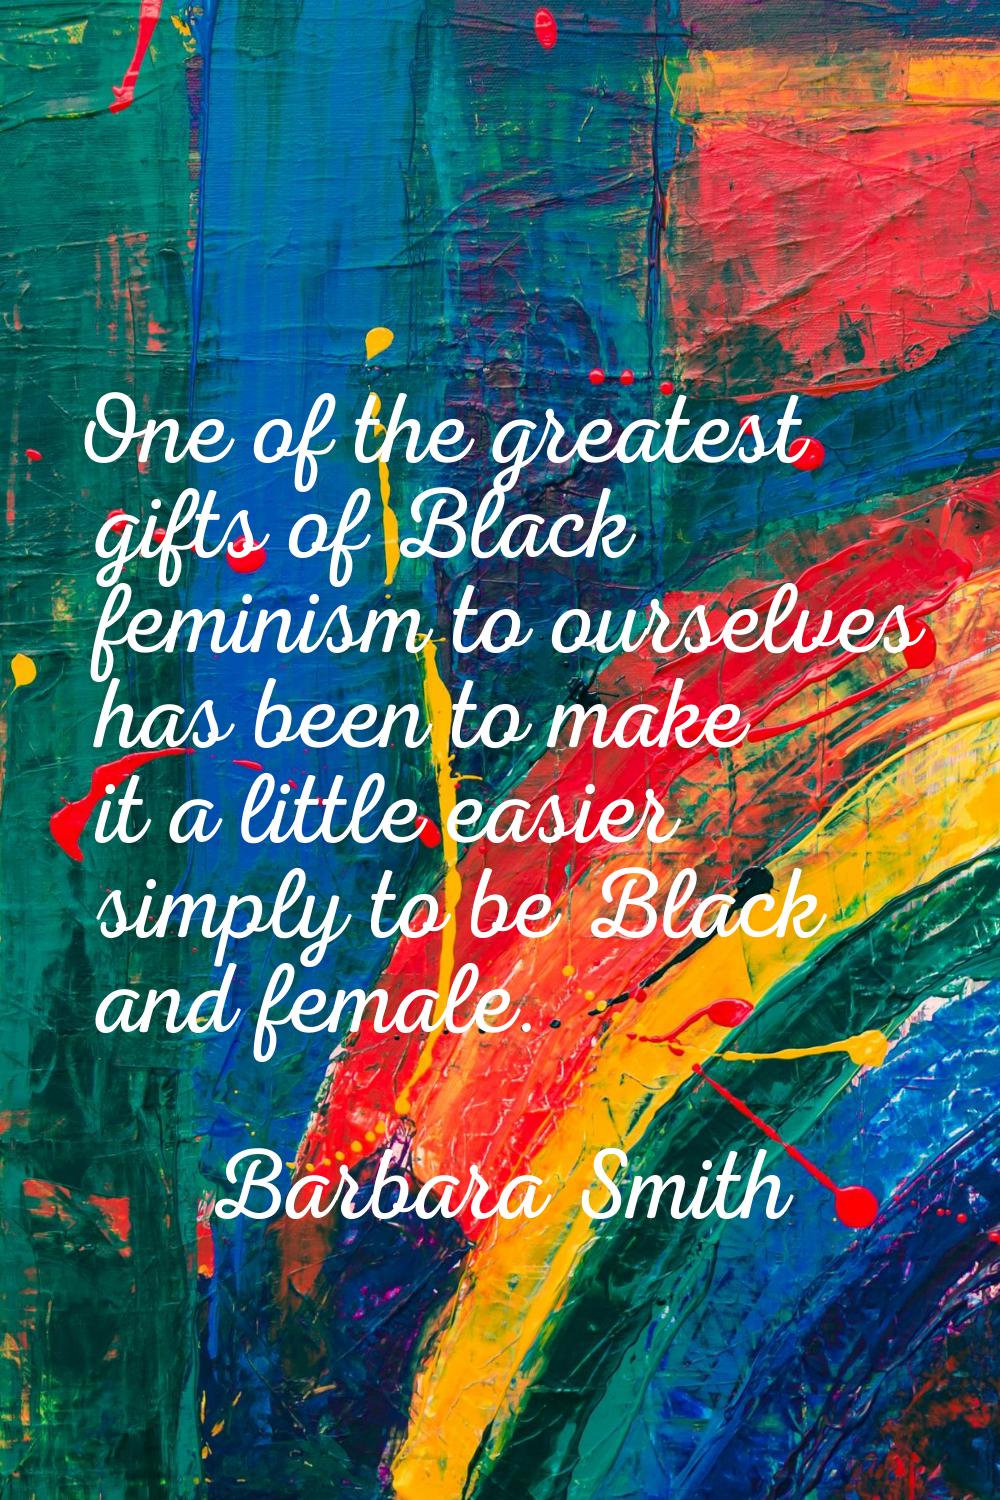 One of the greatest gifts of Black feminism to ourselves has been to make it a little easier simply